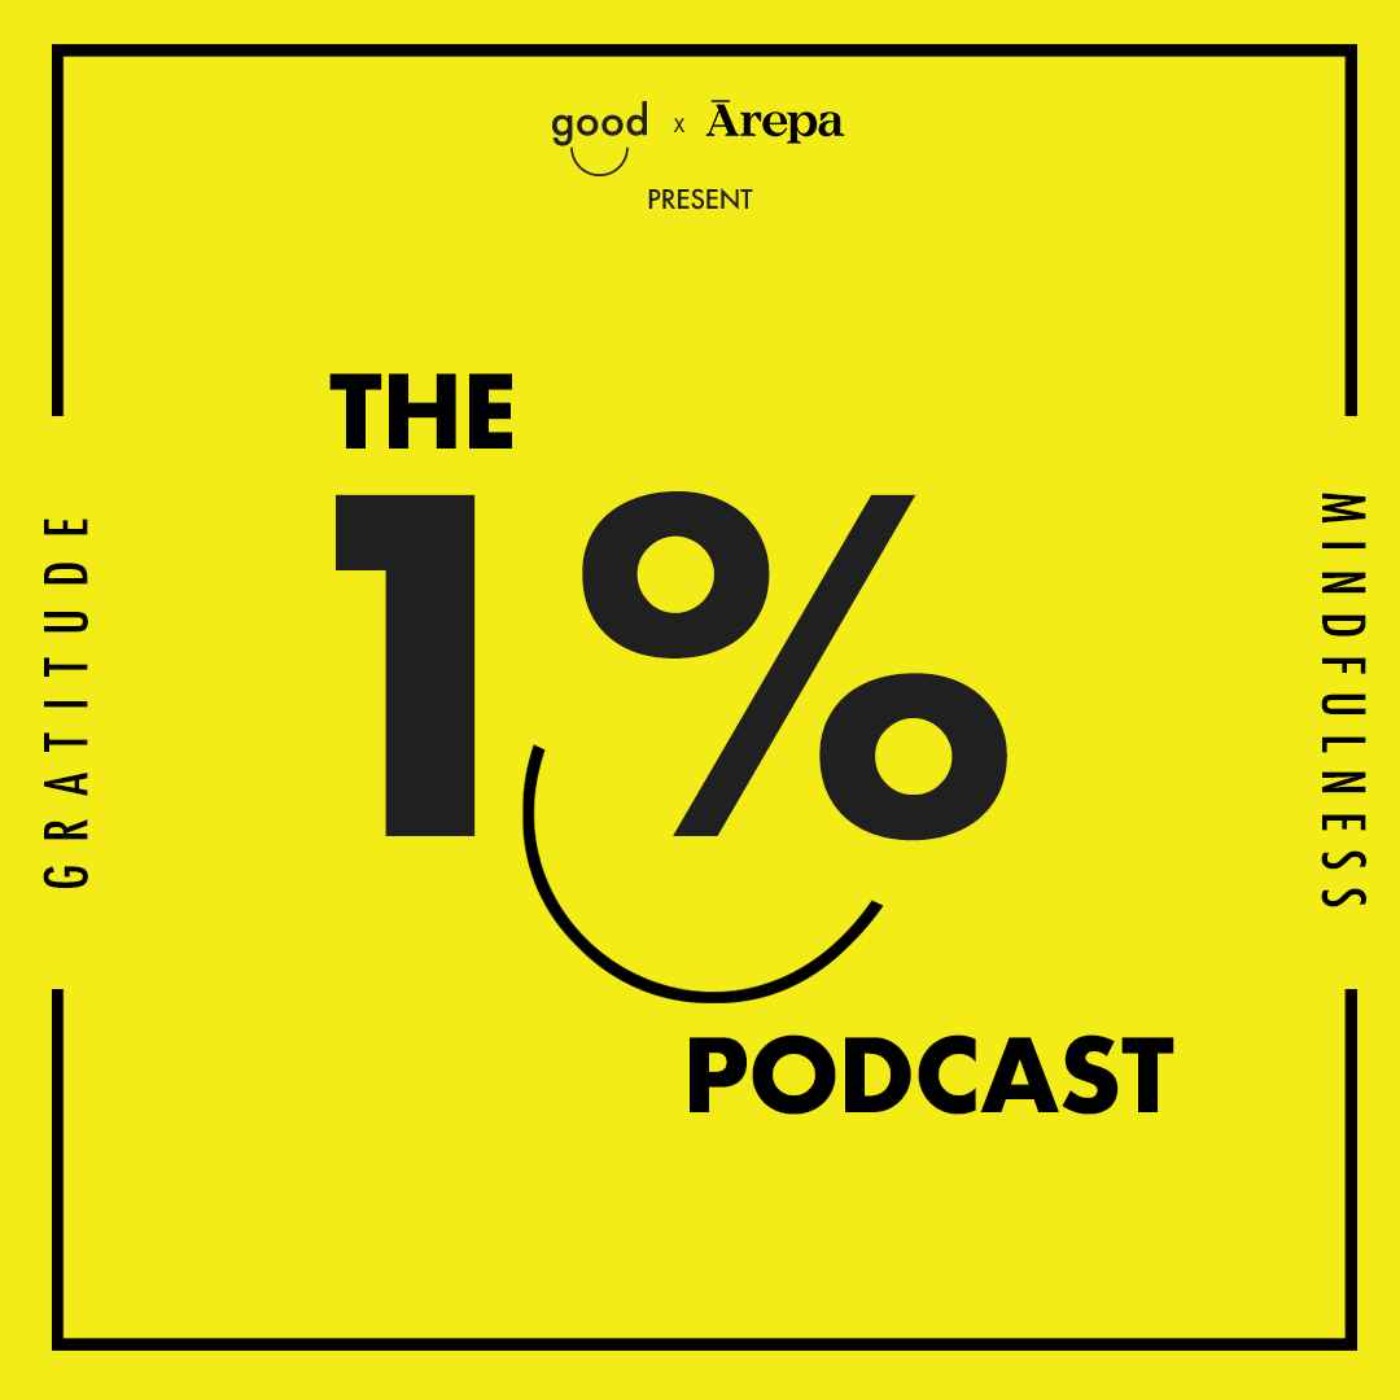 1% Pod - I wish I was more educated on this topic.